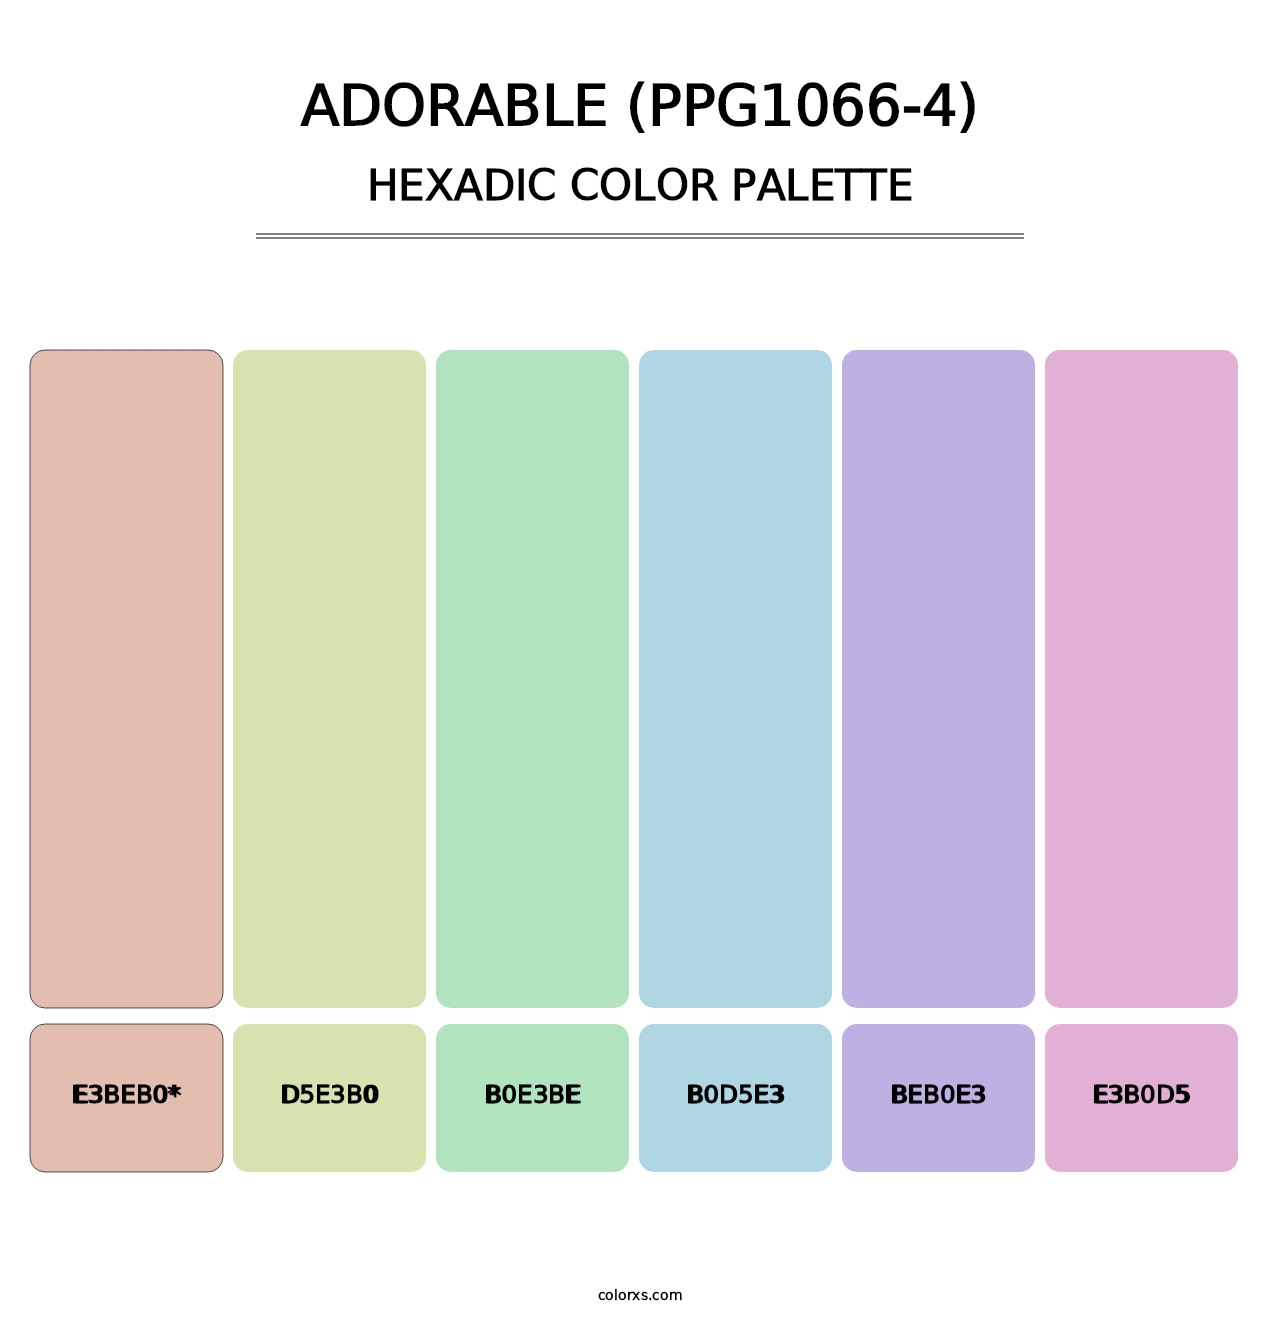 Adorable (PPG1066-4) - Hexadic Color Palette